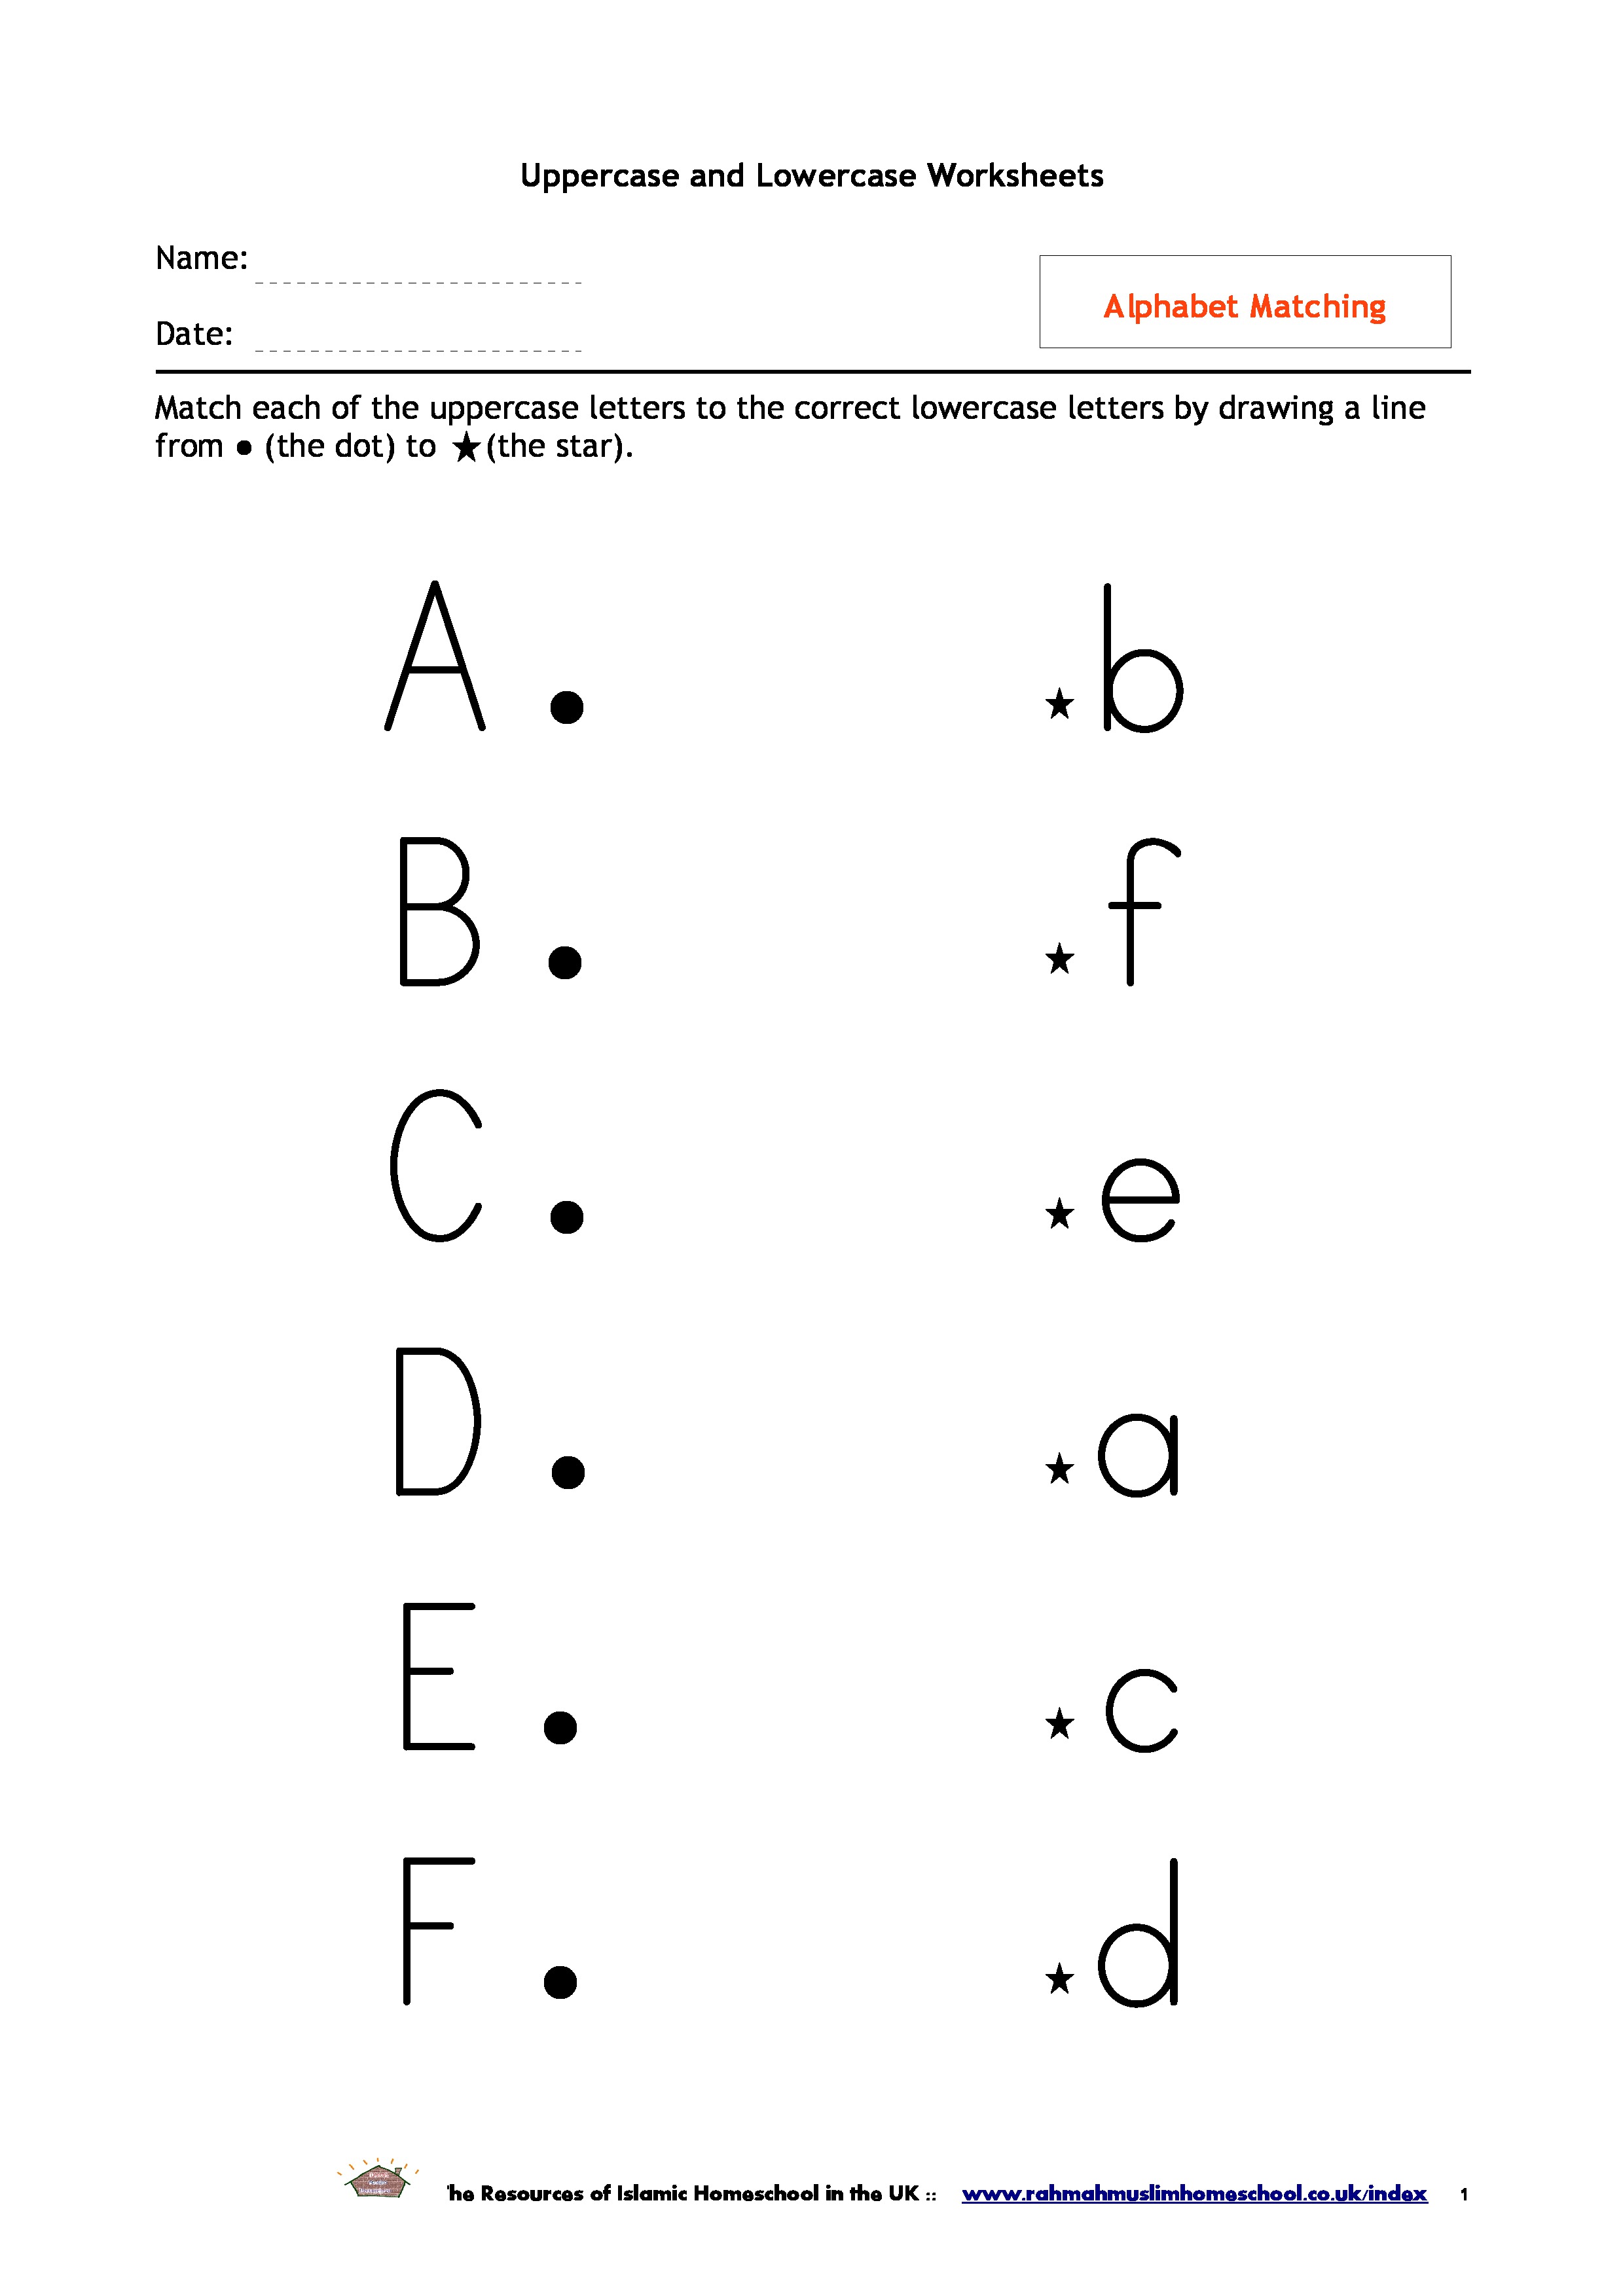 Alphabet Matching Worksheets The Resources of Islamic Homeschool in